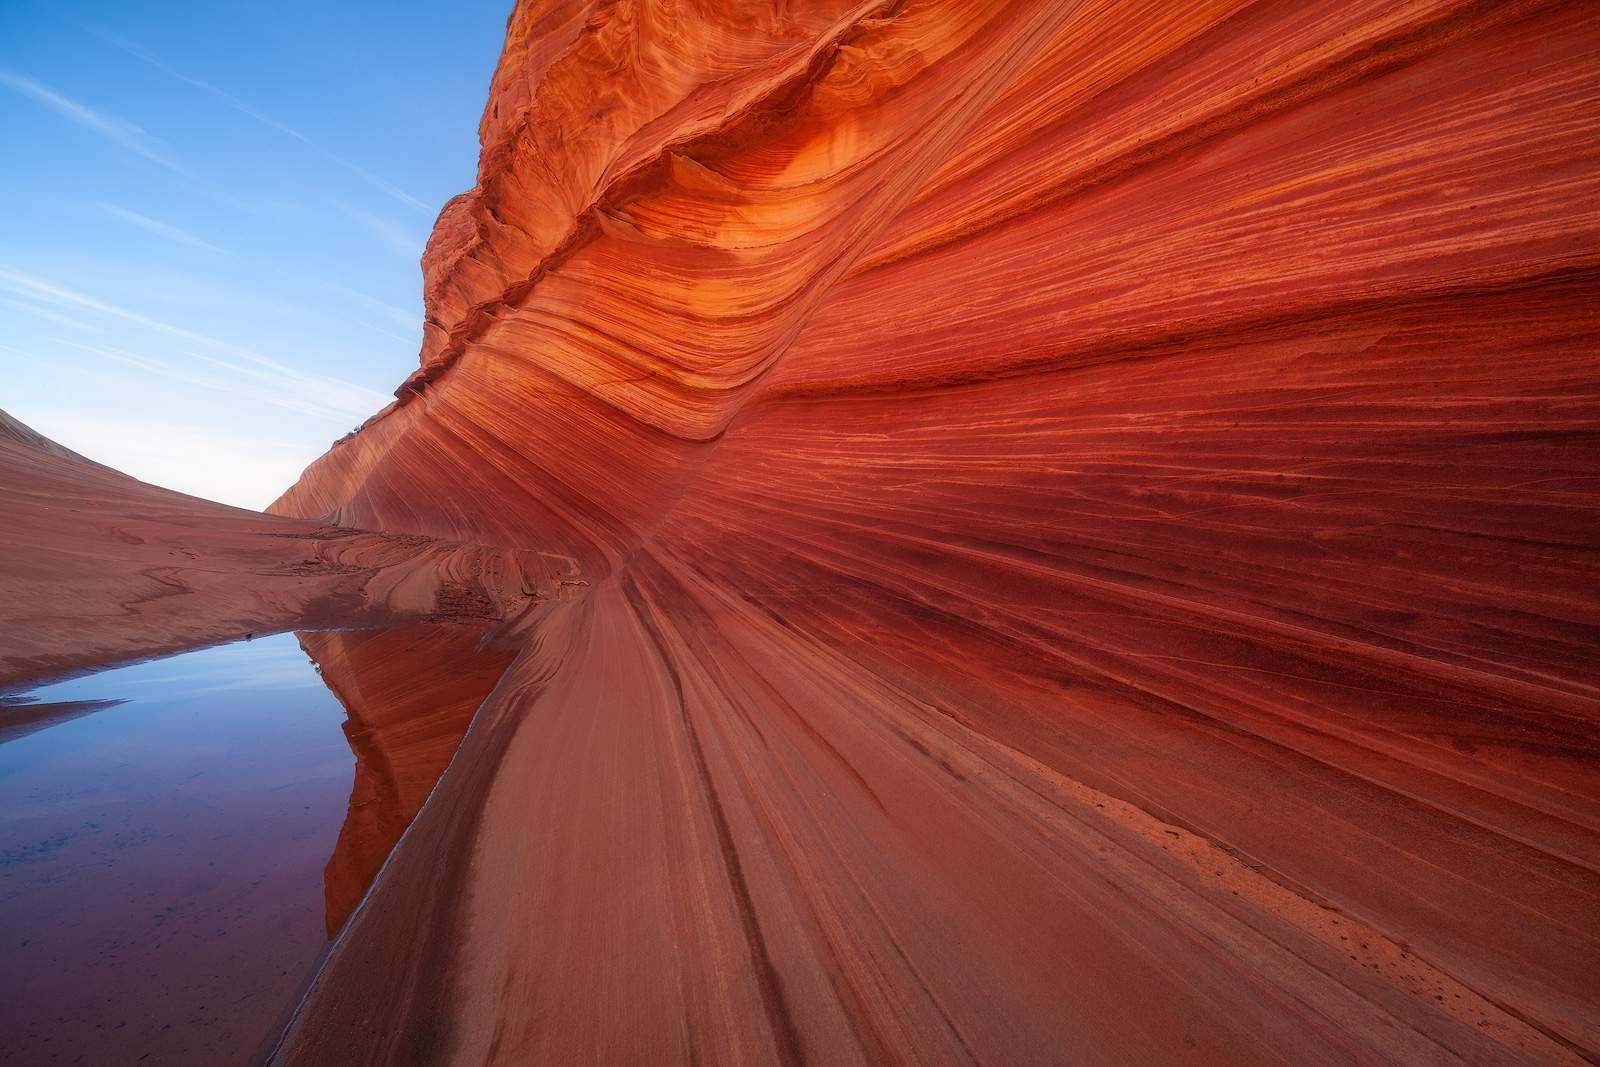 Reflection of the bright orange sandstone of the Wave